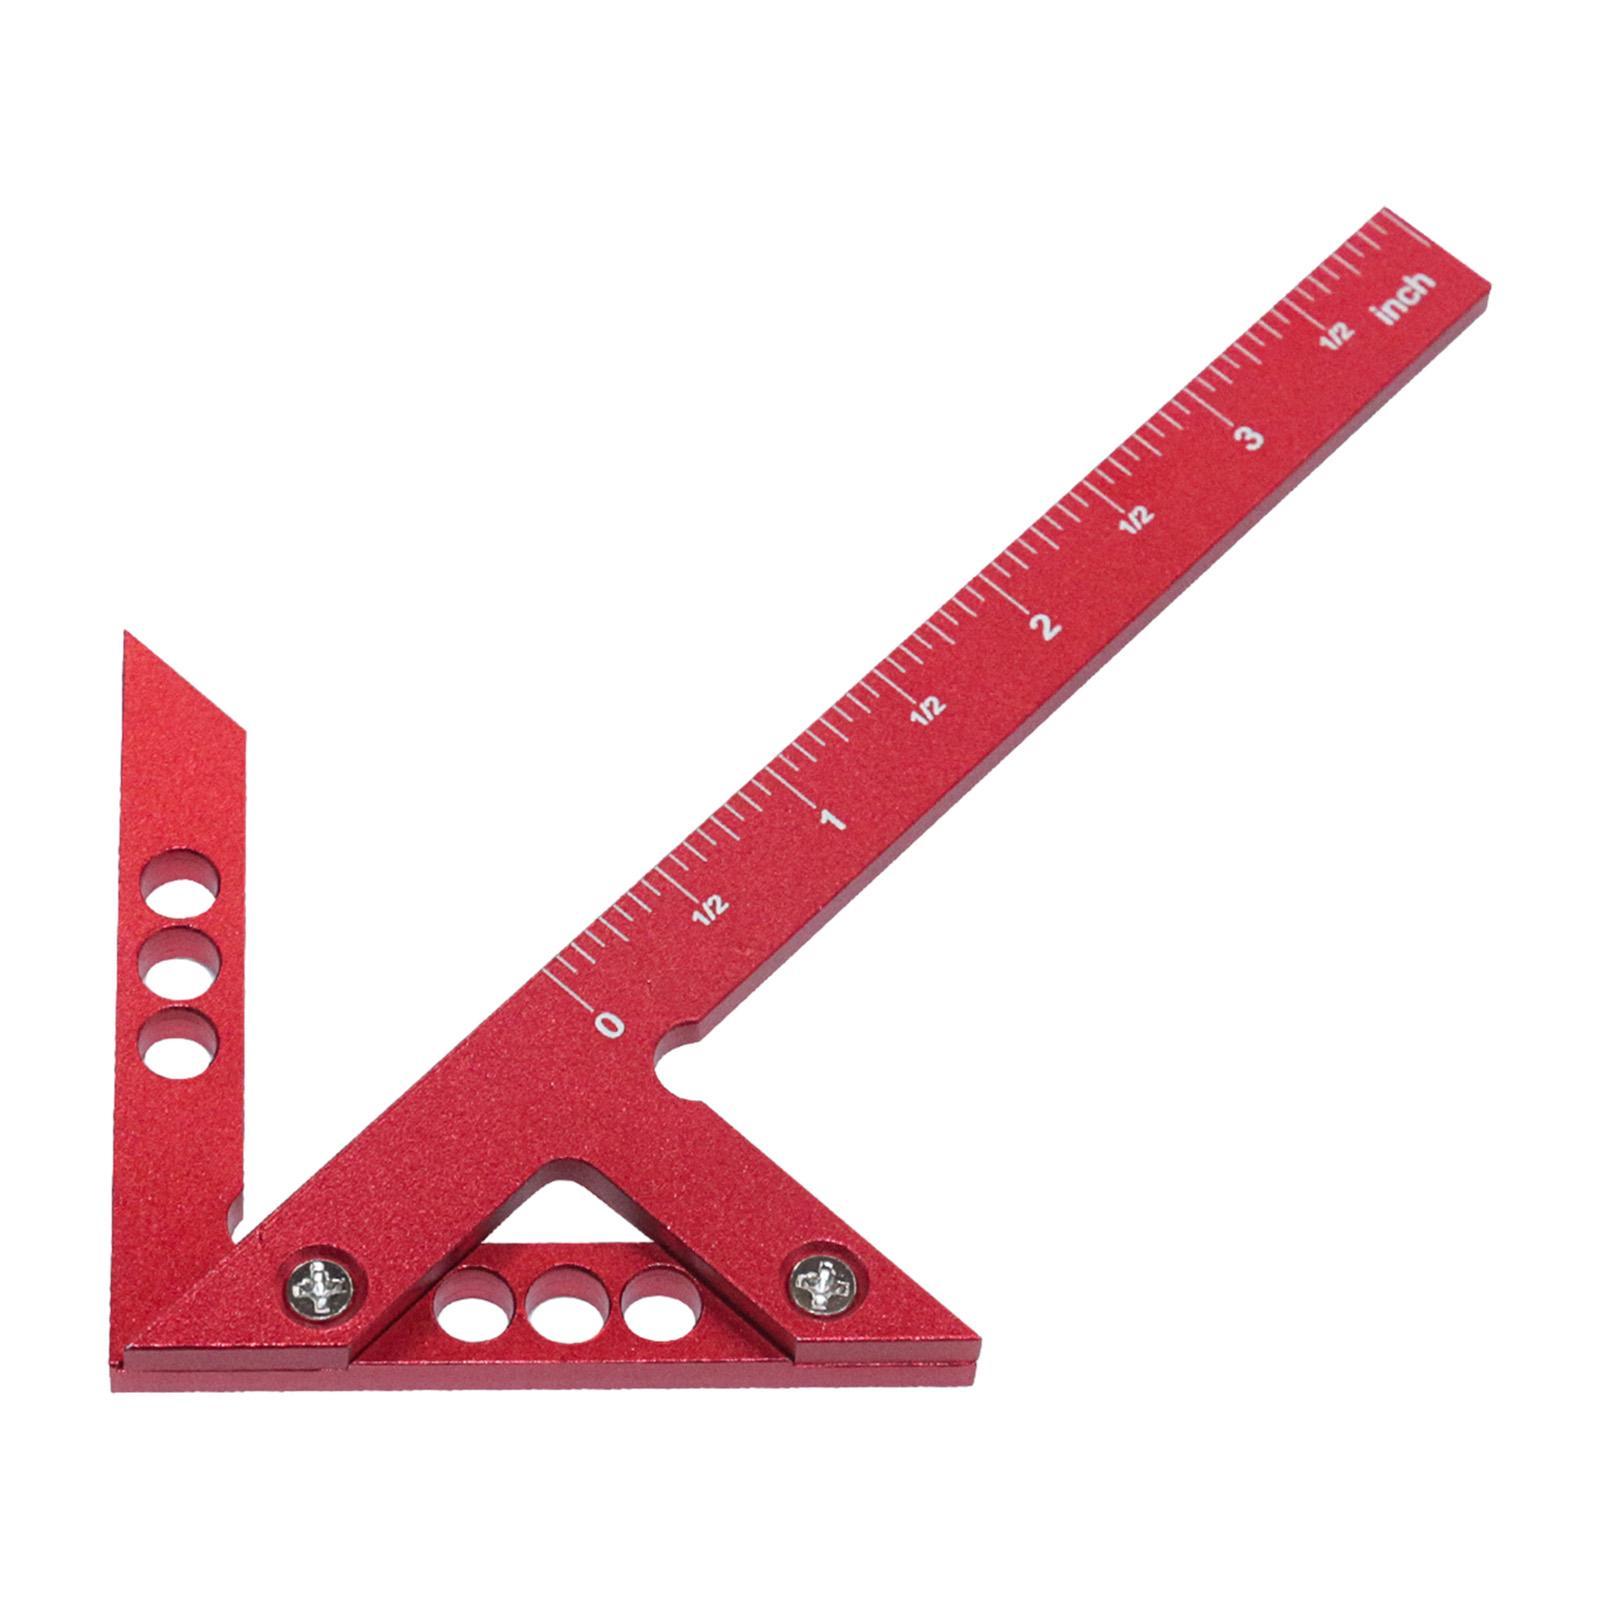 Woodworking Center Find Measuring Ruler Scriber Aluminum Alloy inch Ruler for Marking Centers on Round Discs and Shafts